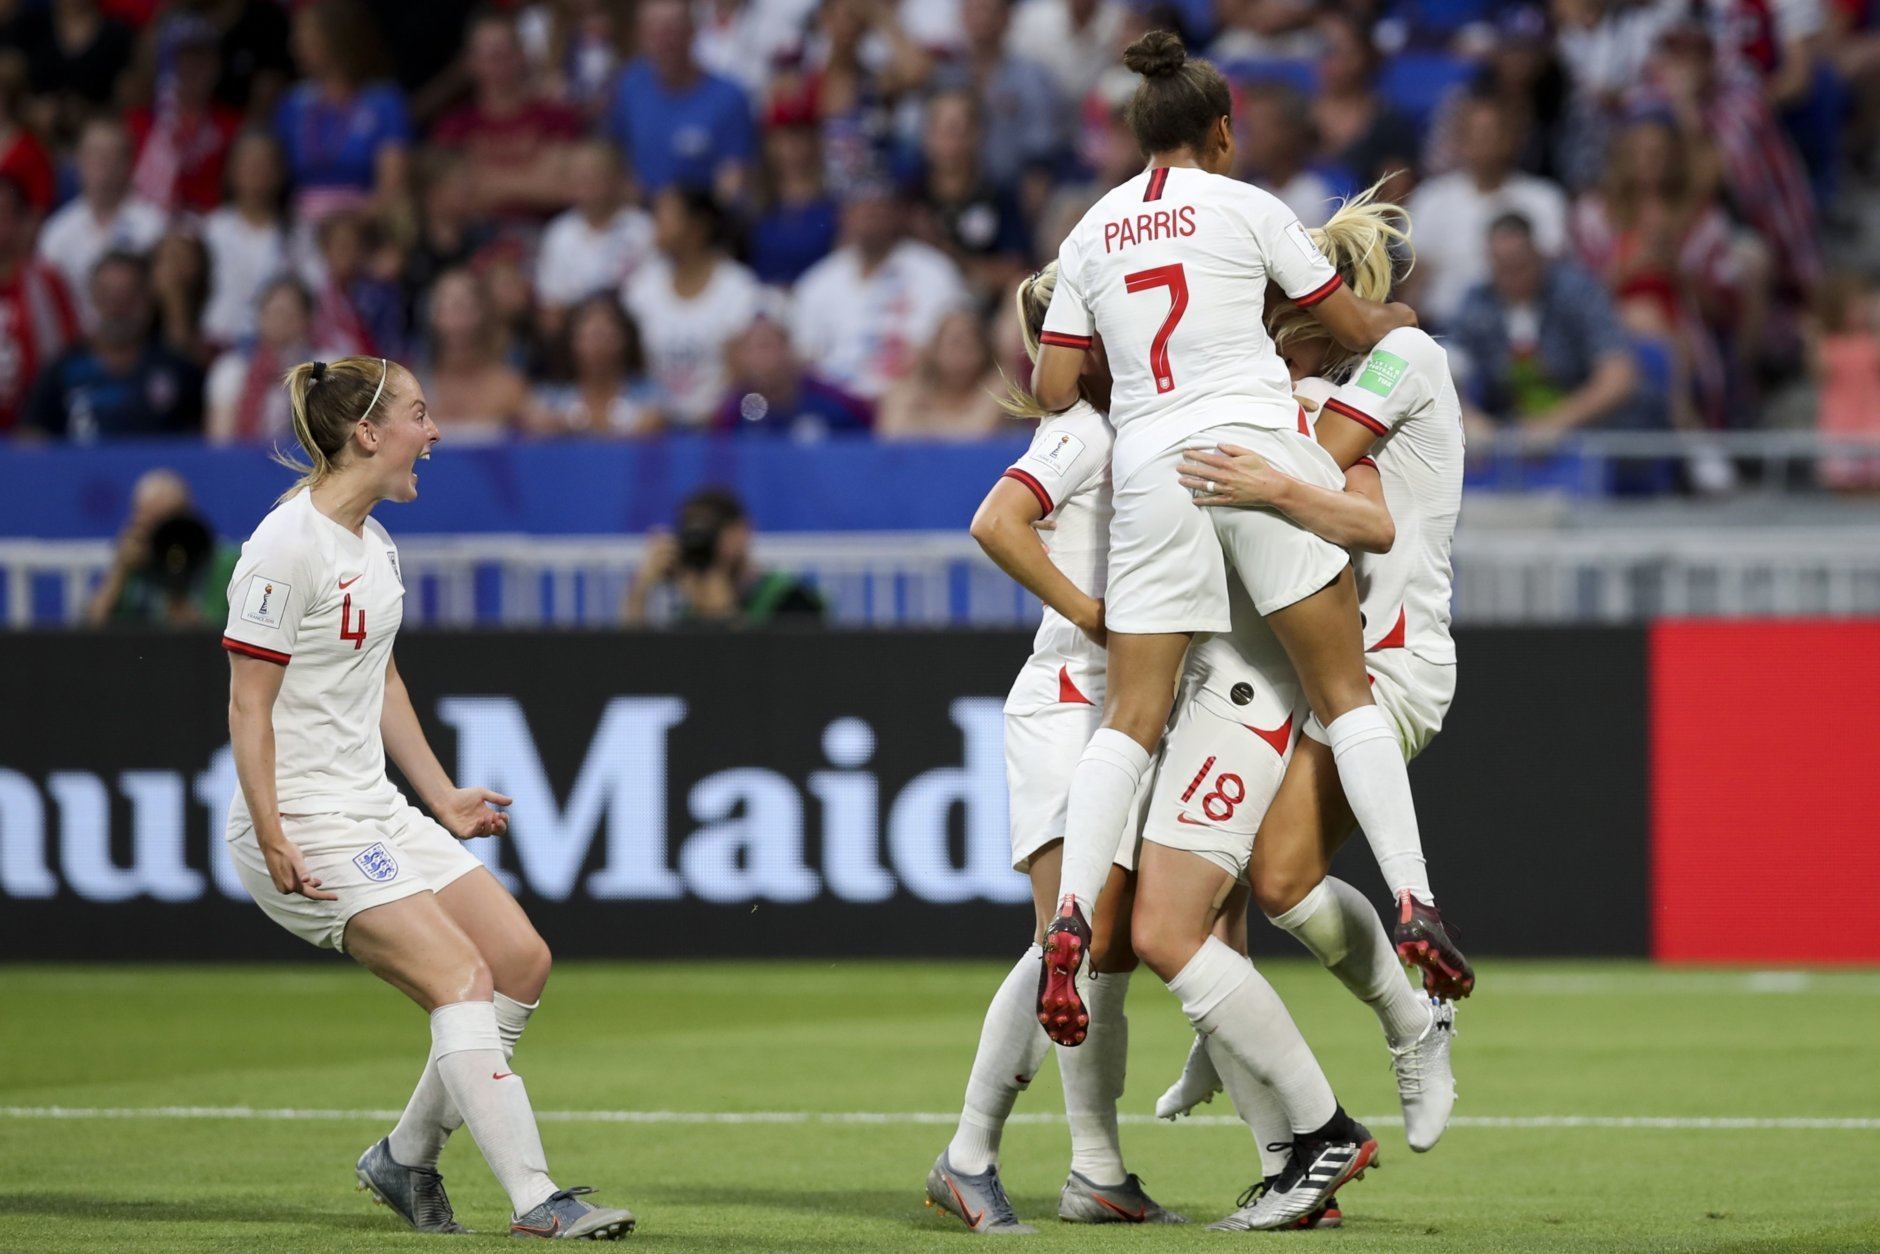 England players celebrate after scoring against United States during the Women's World Cup semifinal soccer match at the Stade de Lyon outside Lyon, France, Tuesday, July 2, 2019. (AP Photo/Francisco Seco)